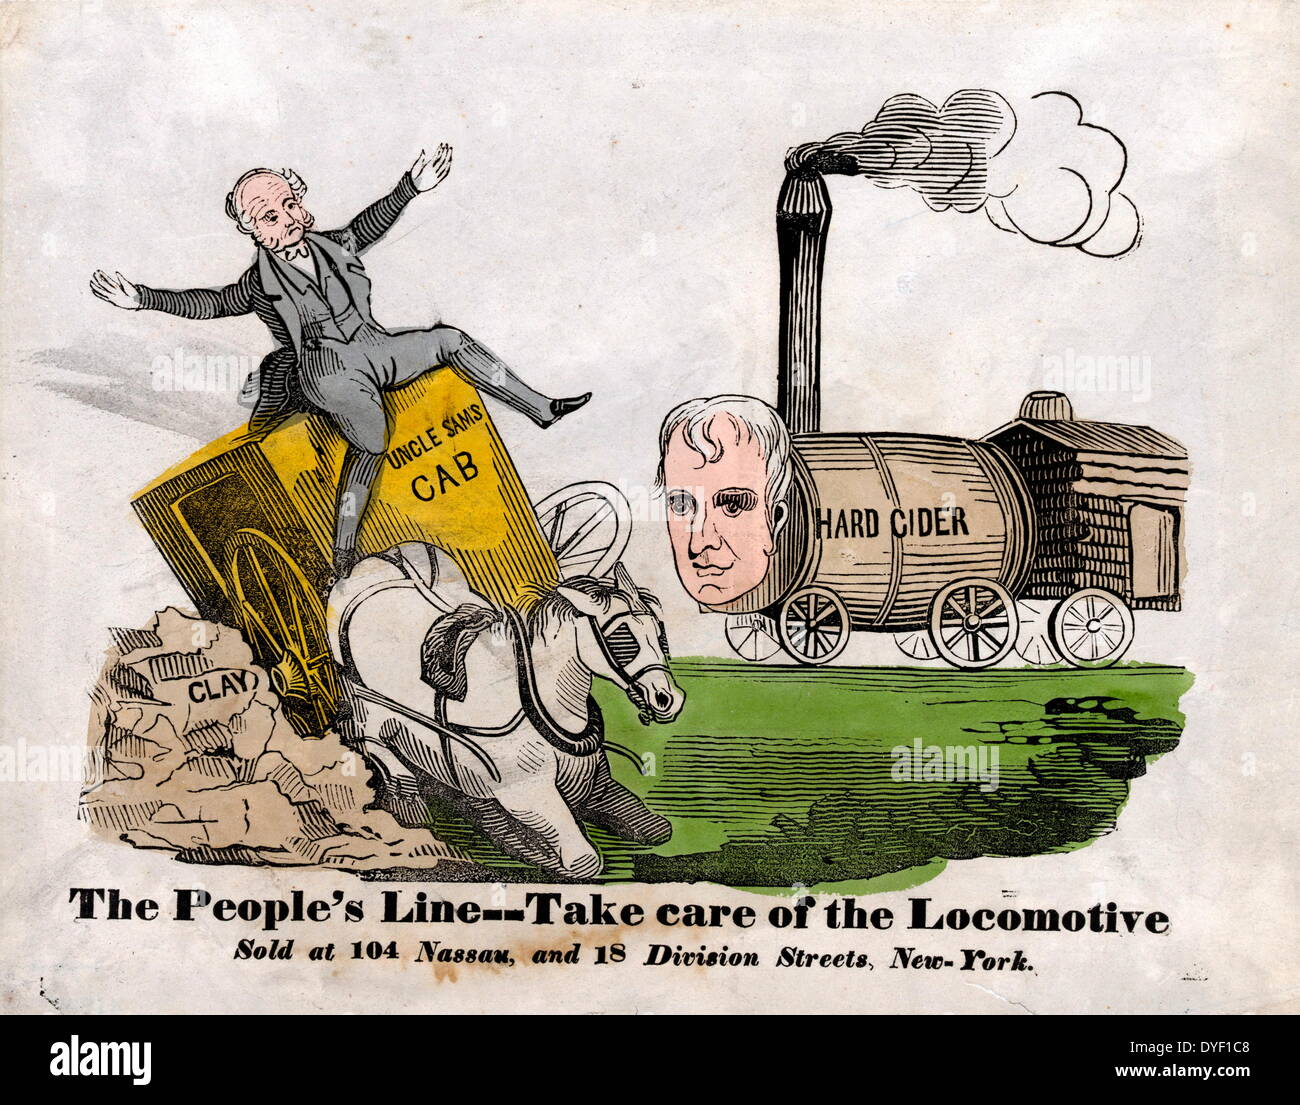 The People's Line, a political poster image from 1840 satirising Incumbent President Martin Van Buren, Whig presidential candidate William Henry Harrison, and Henry Clay. The people's line--Take care of the locomotive. Print made from woodcut and letterpress with watercolour, on wove paper. Stock Photo